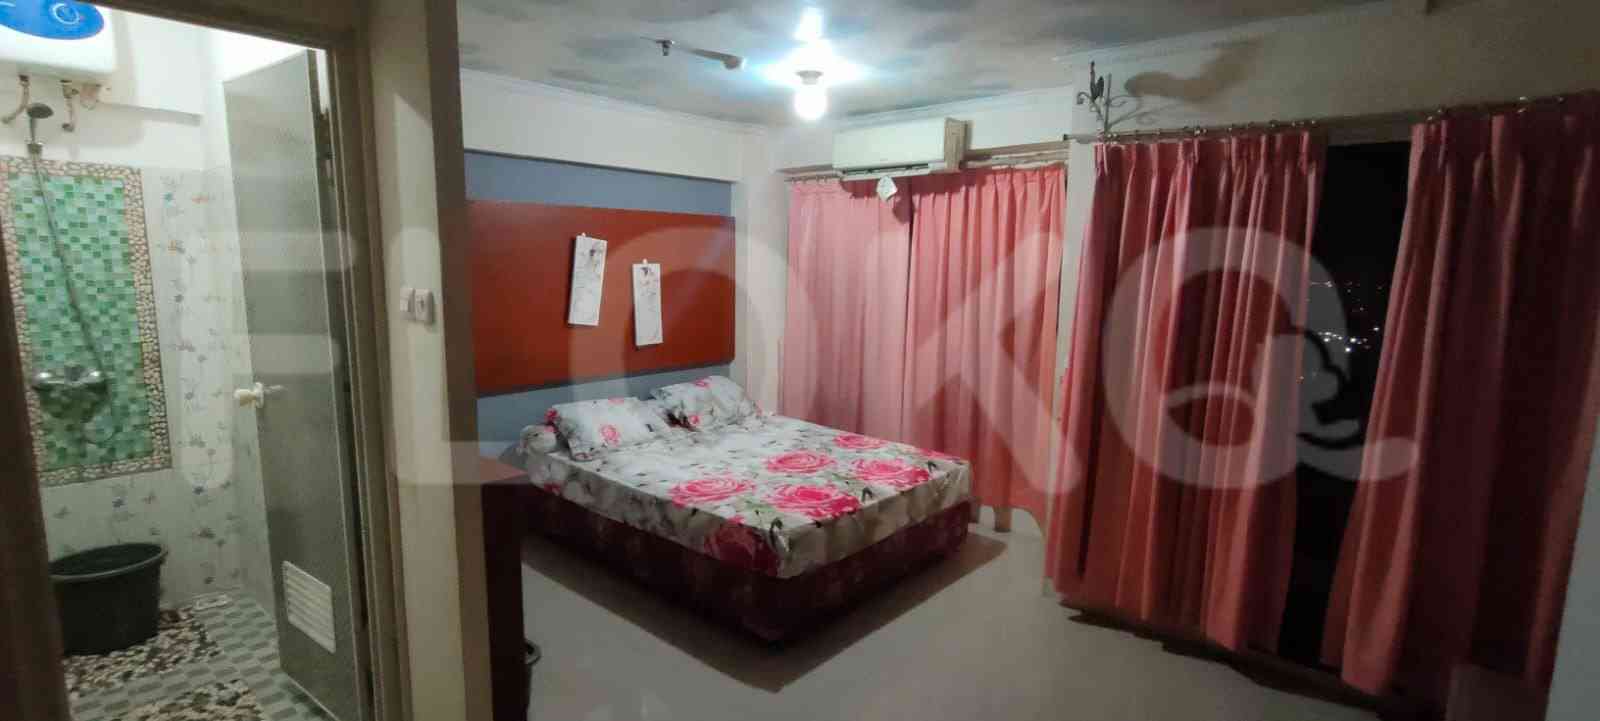 1 Bedroom on 21st Floor for Rent in Sentra Timur Residence - fcab27 8